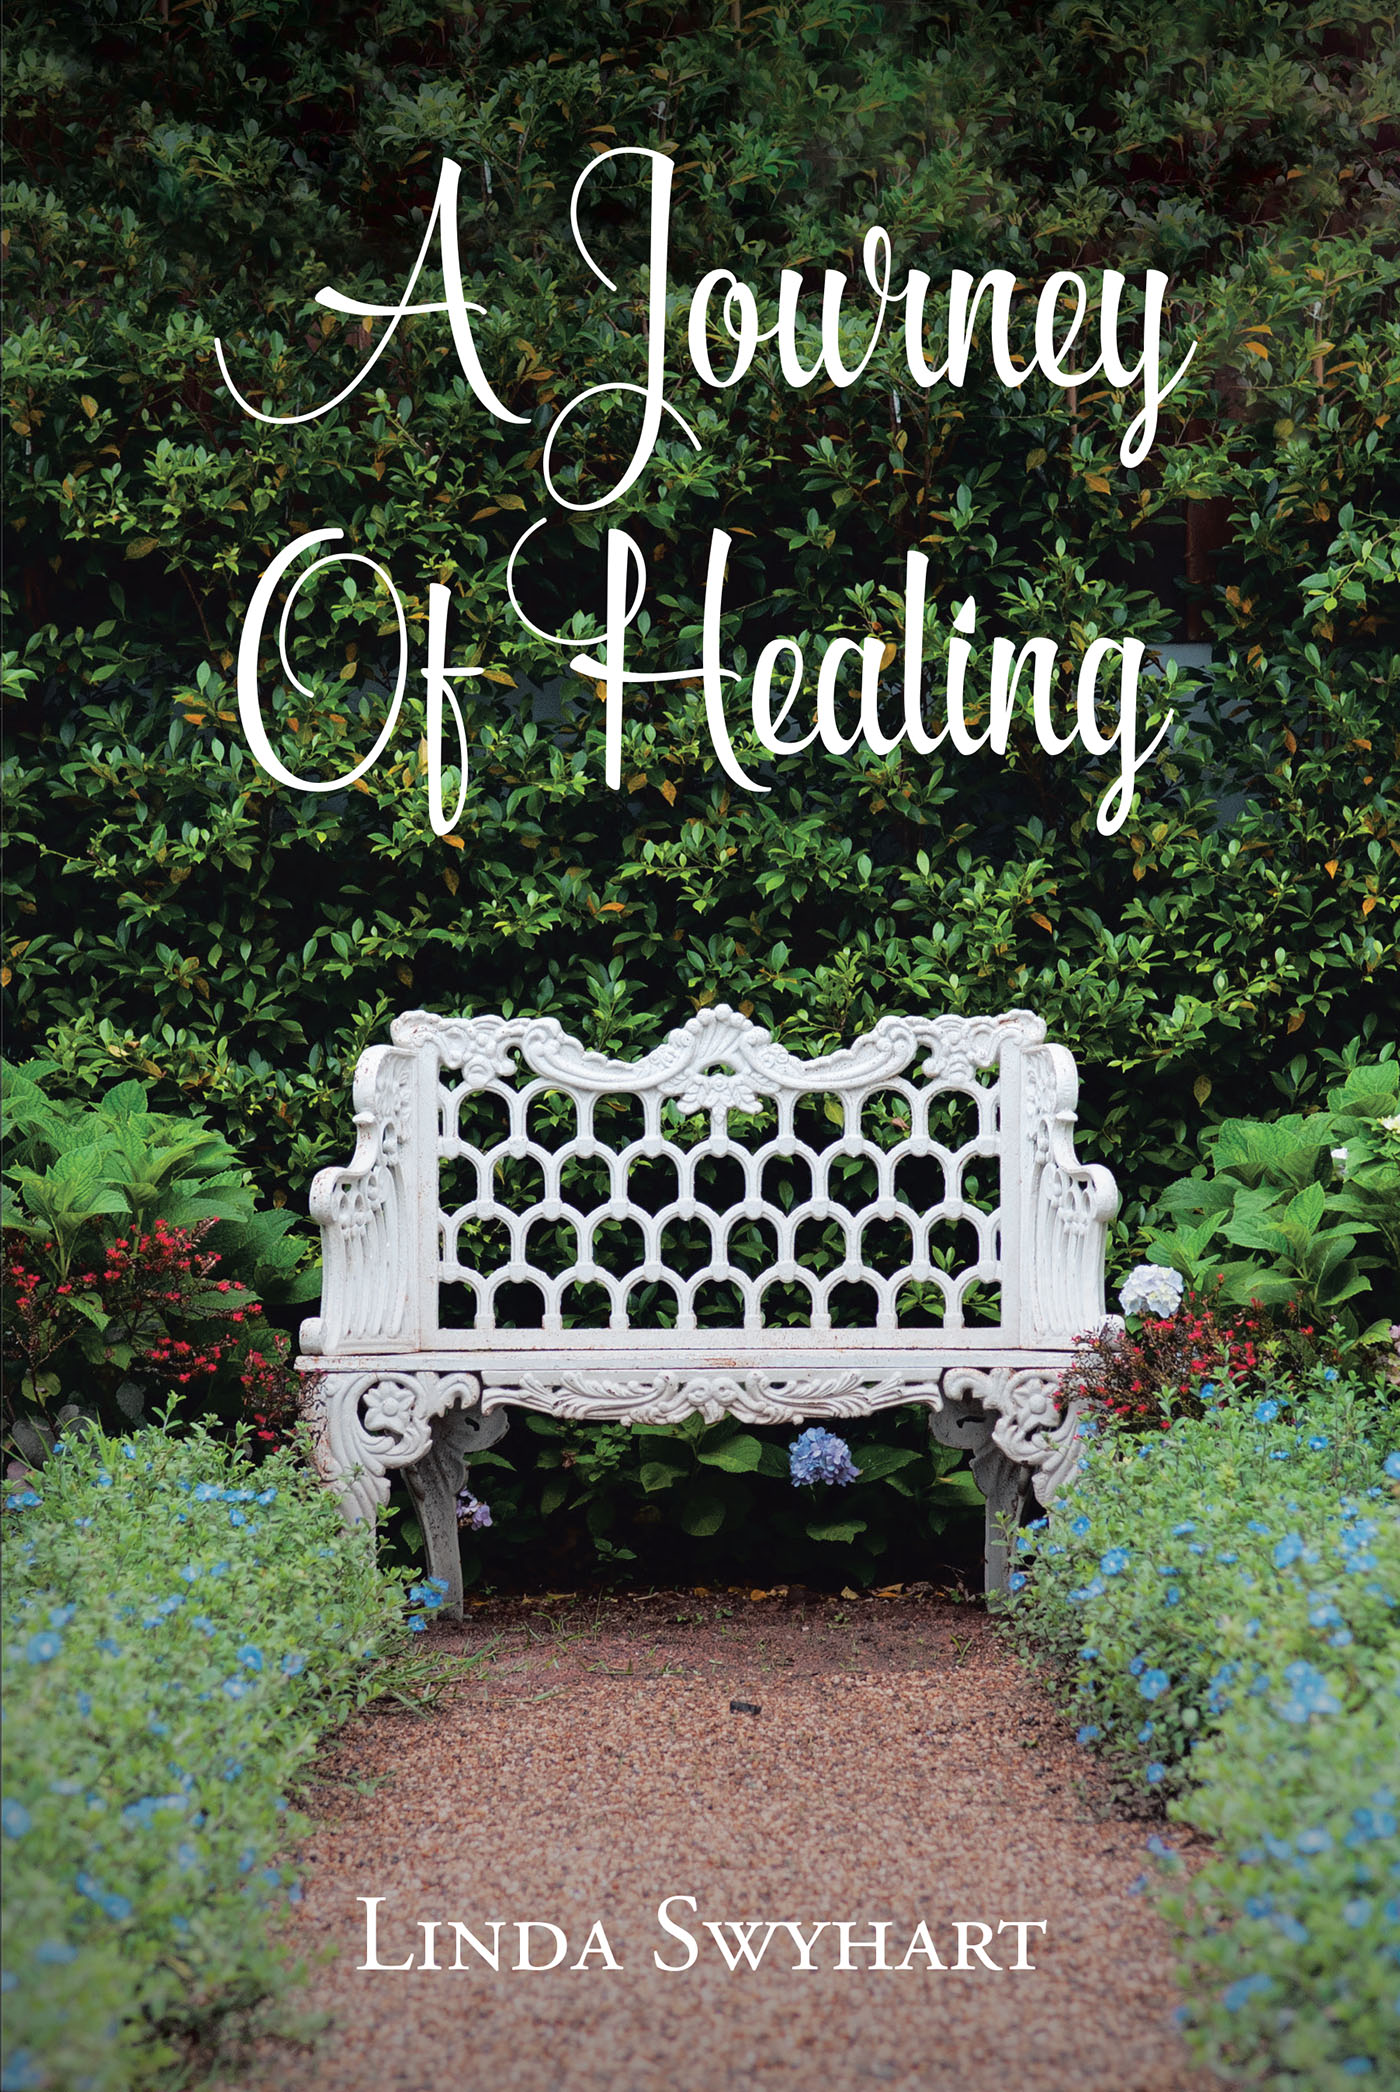 Linda Swyhart’s Newly Released "A Journey Of Healing" is a Thoughtful Look Into the Lessons and Blessings Found Along the Way